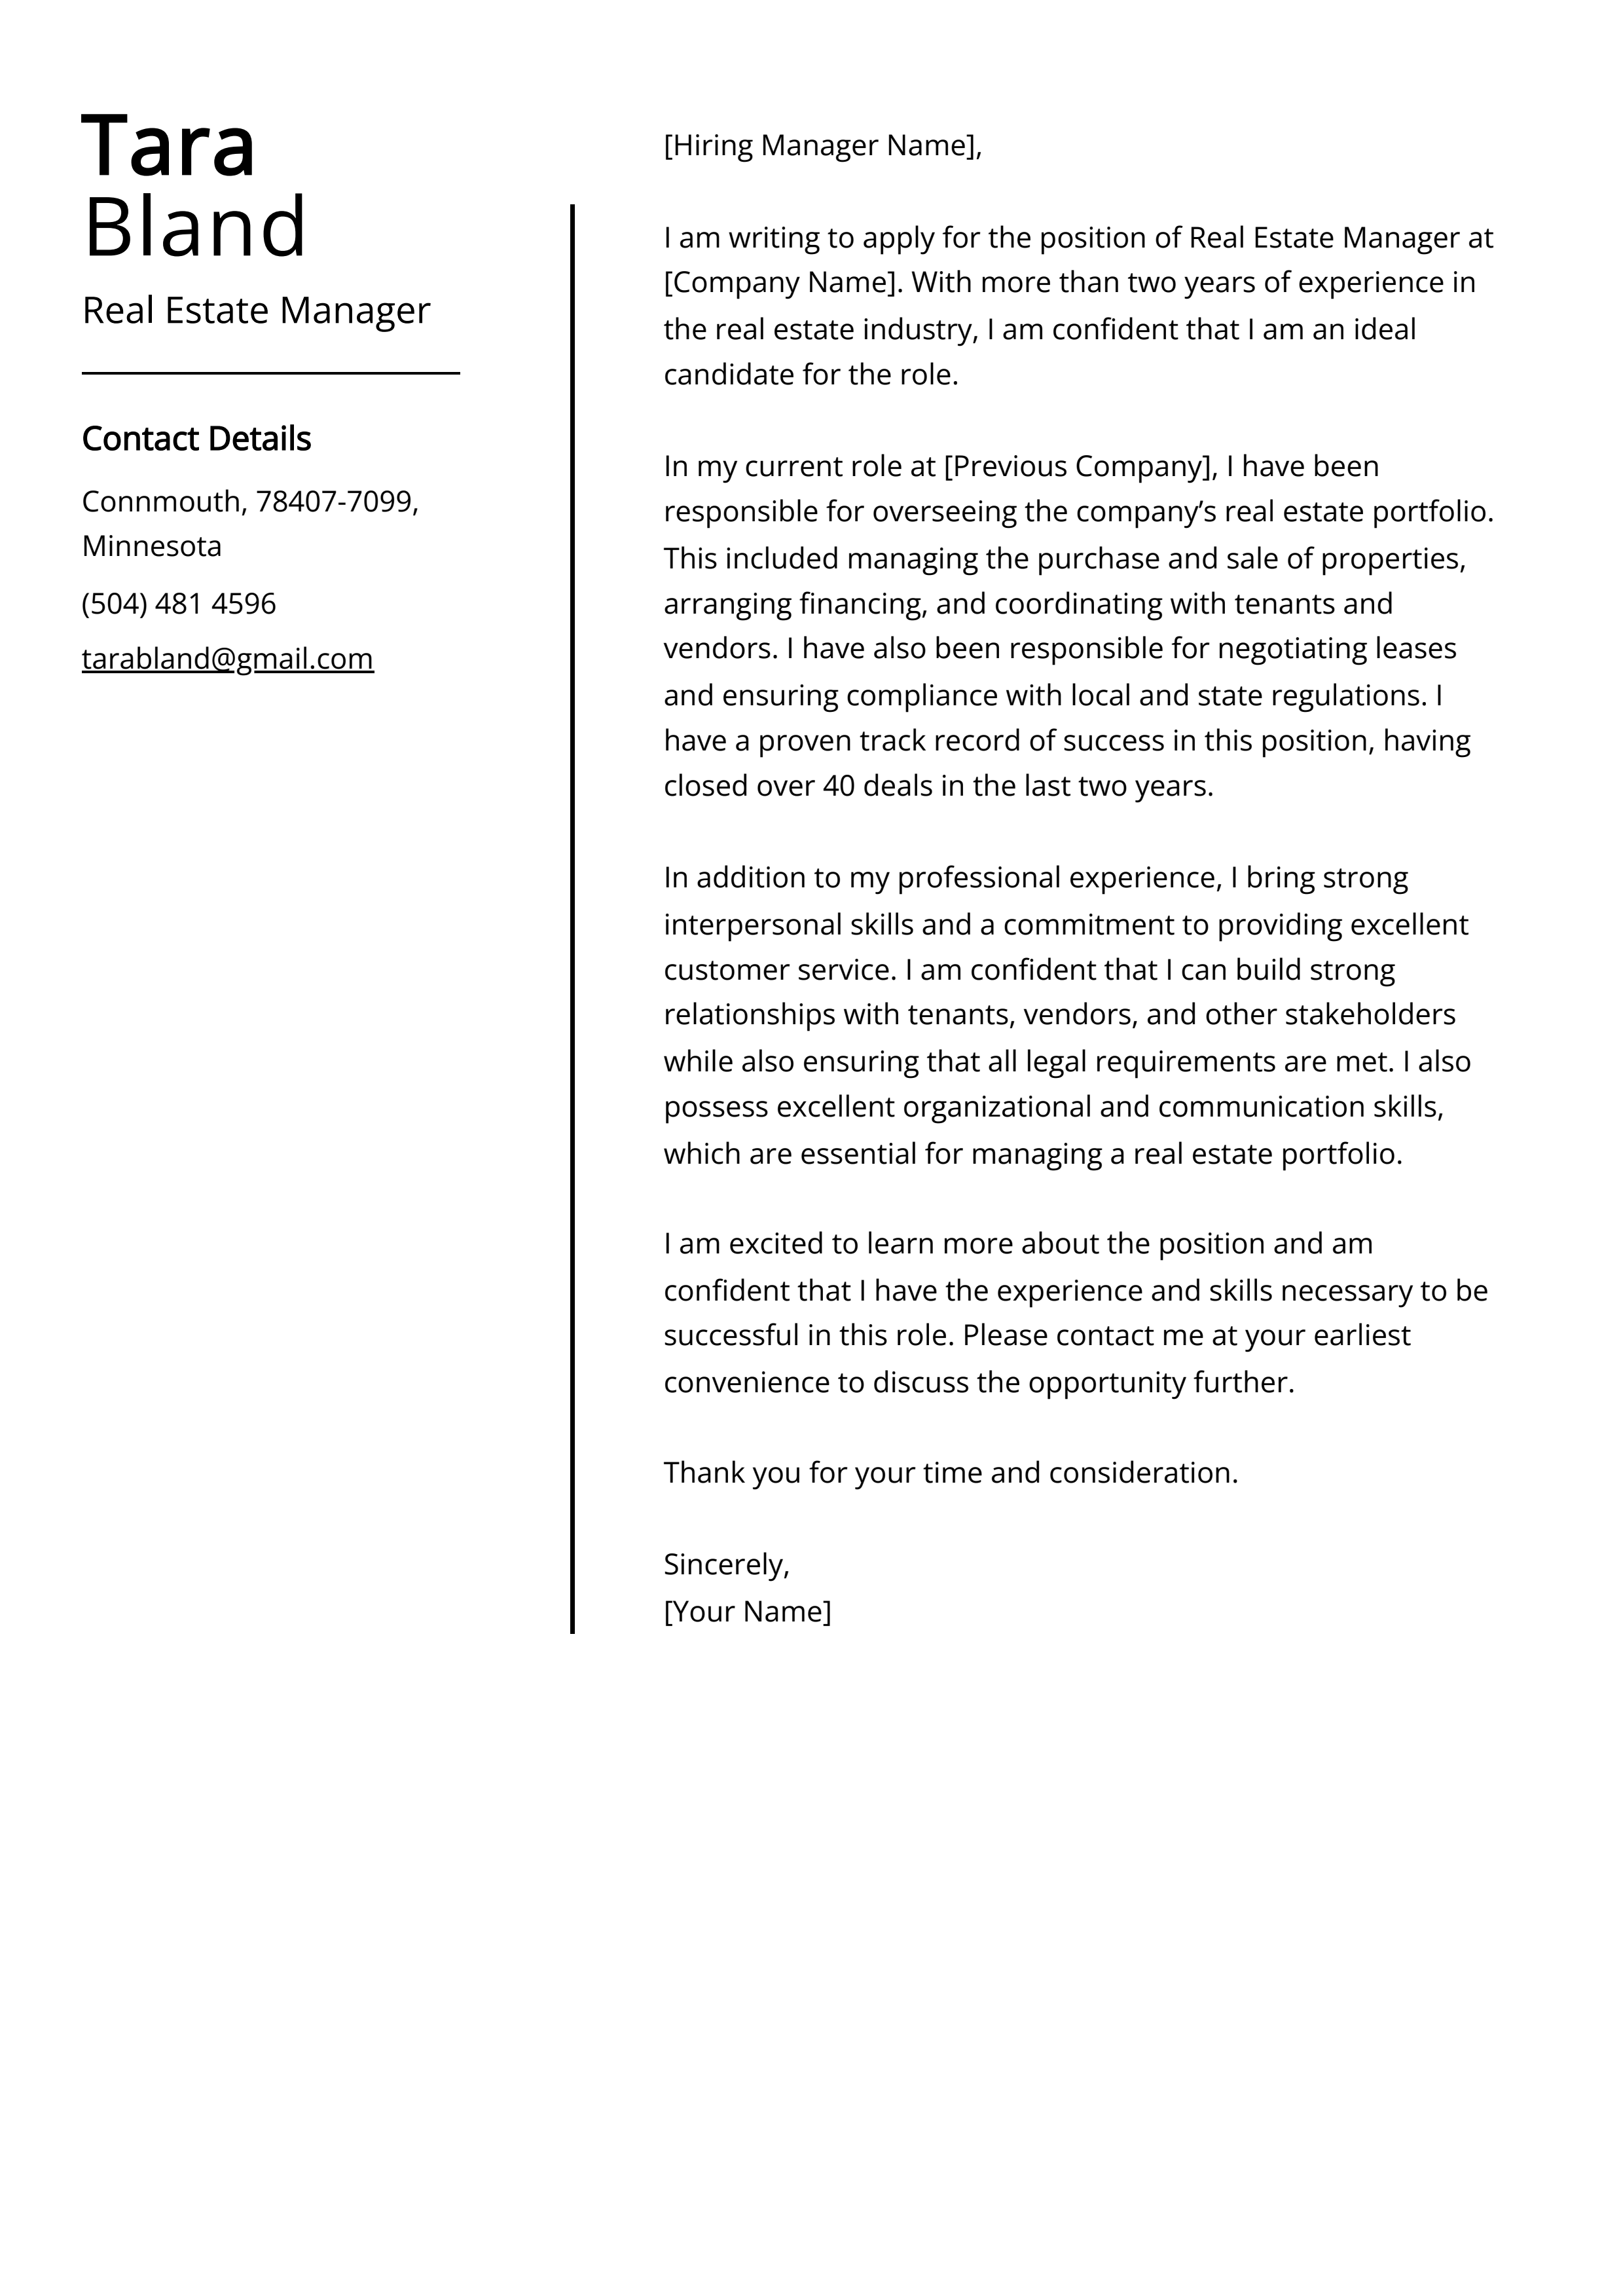 Real Estate Manager Cover Letter Example